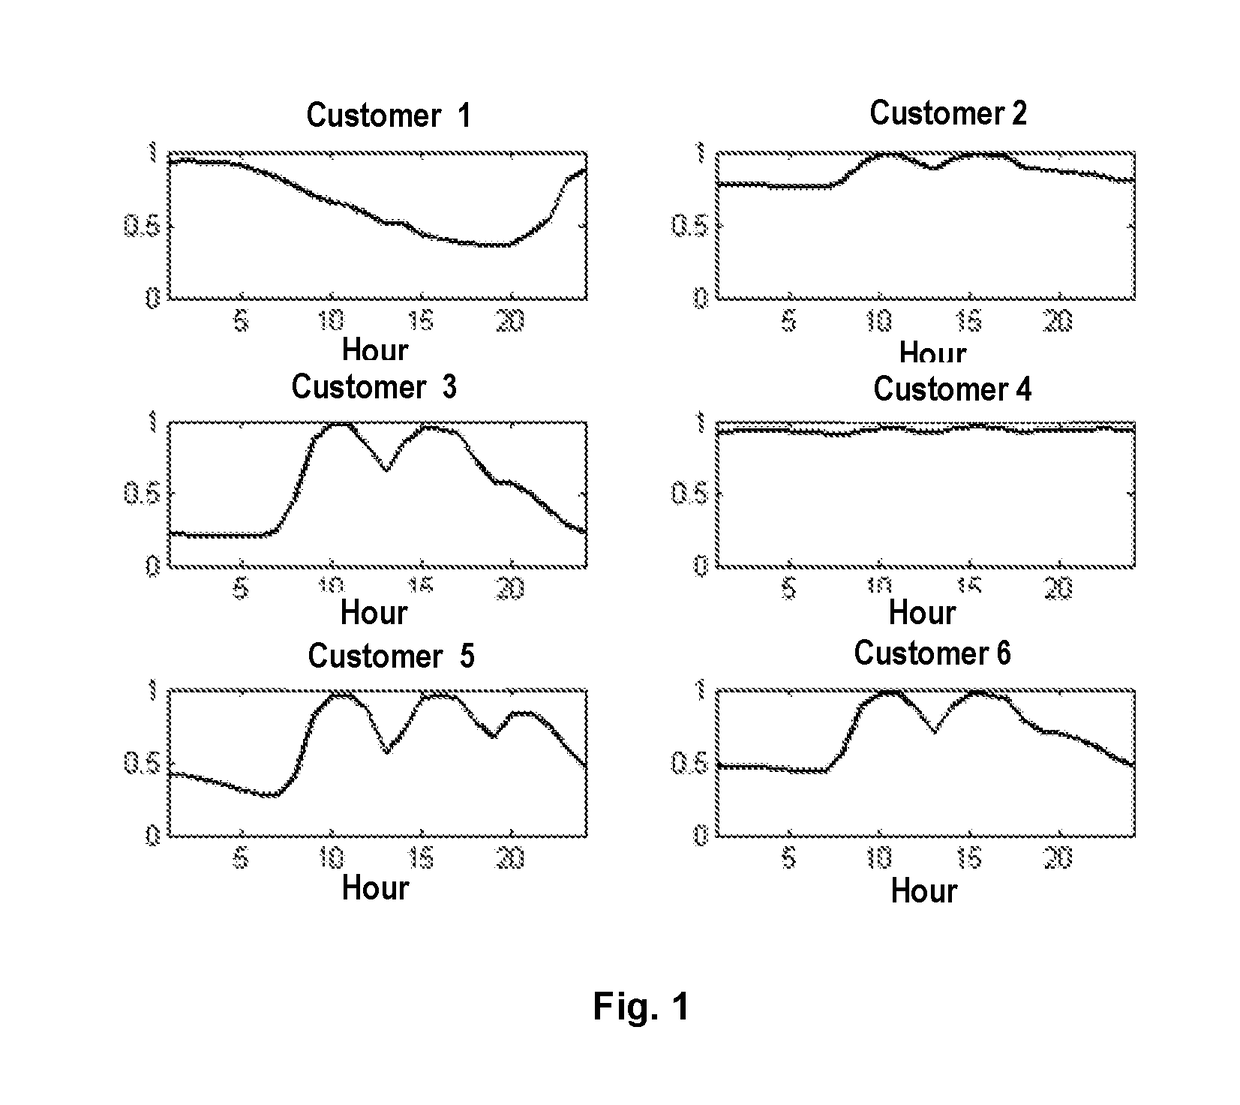 System, method and apparatuses for identifying load volatility of a power customer and a tangible computer readable medium